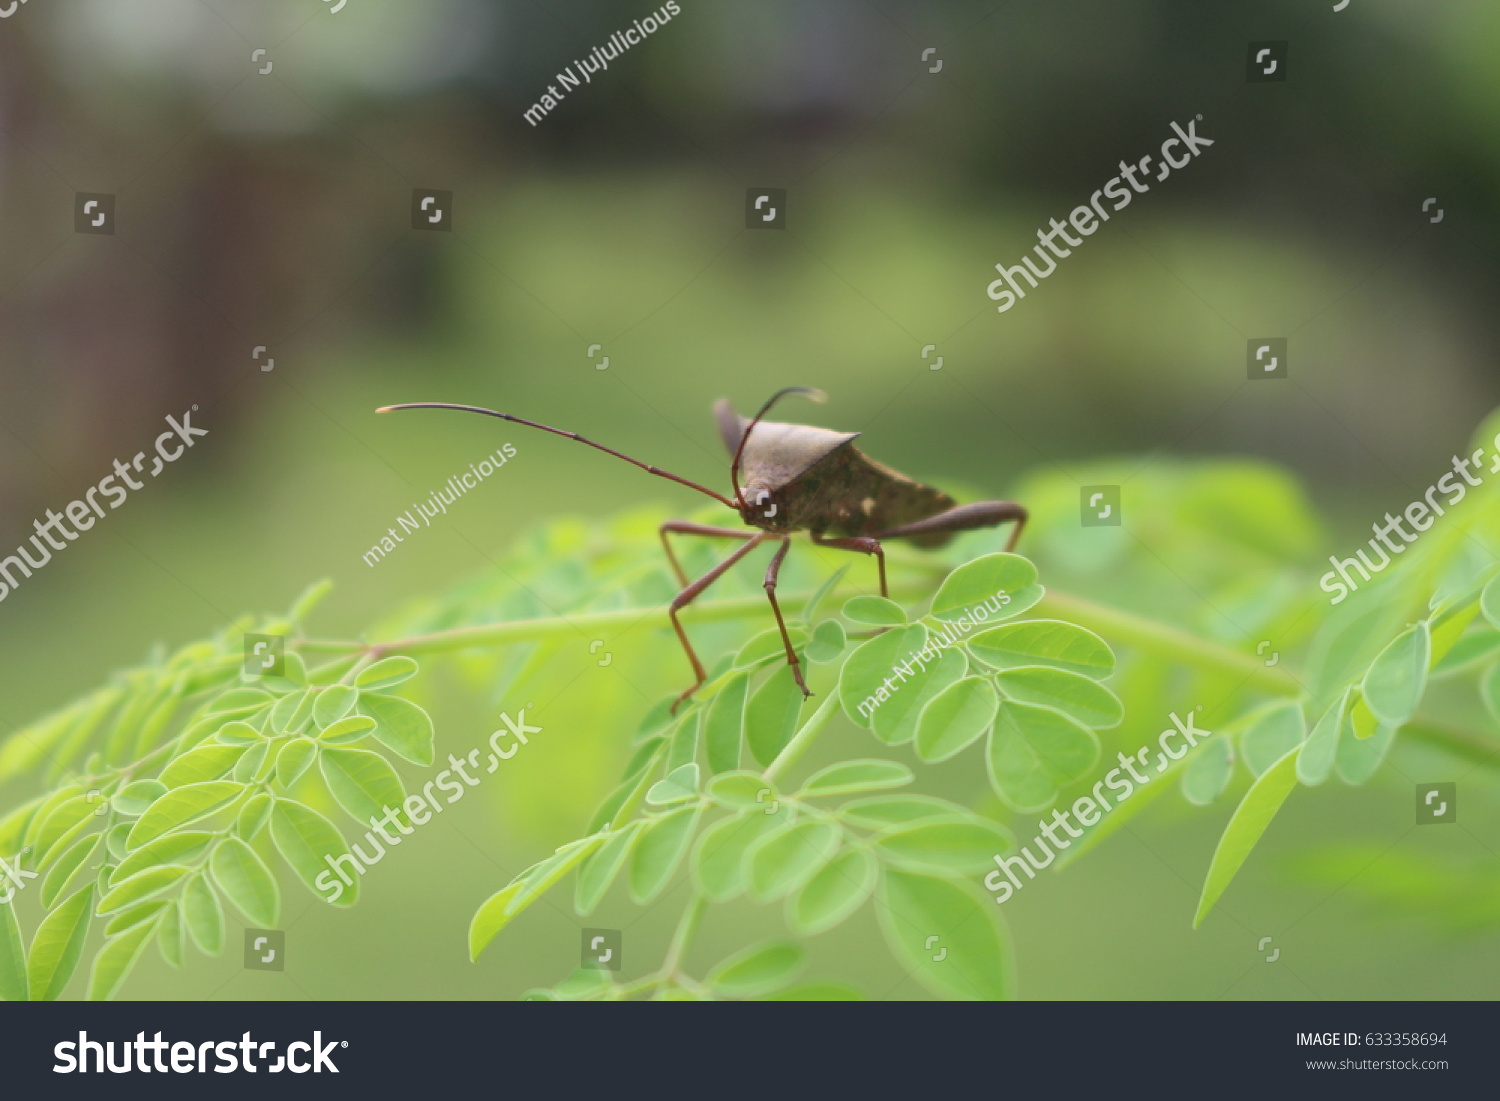  Close up bugs insects with nature background #633358694